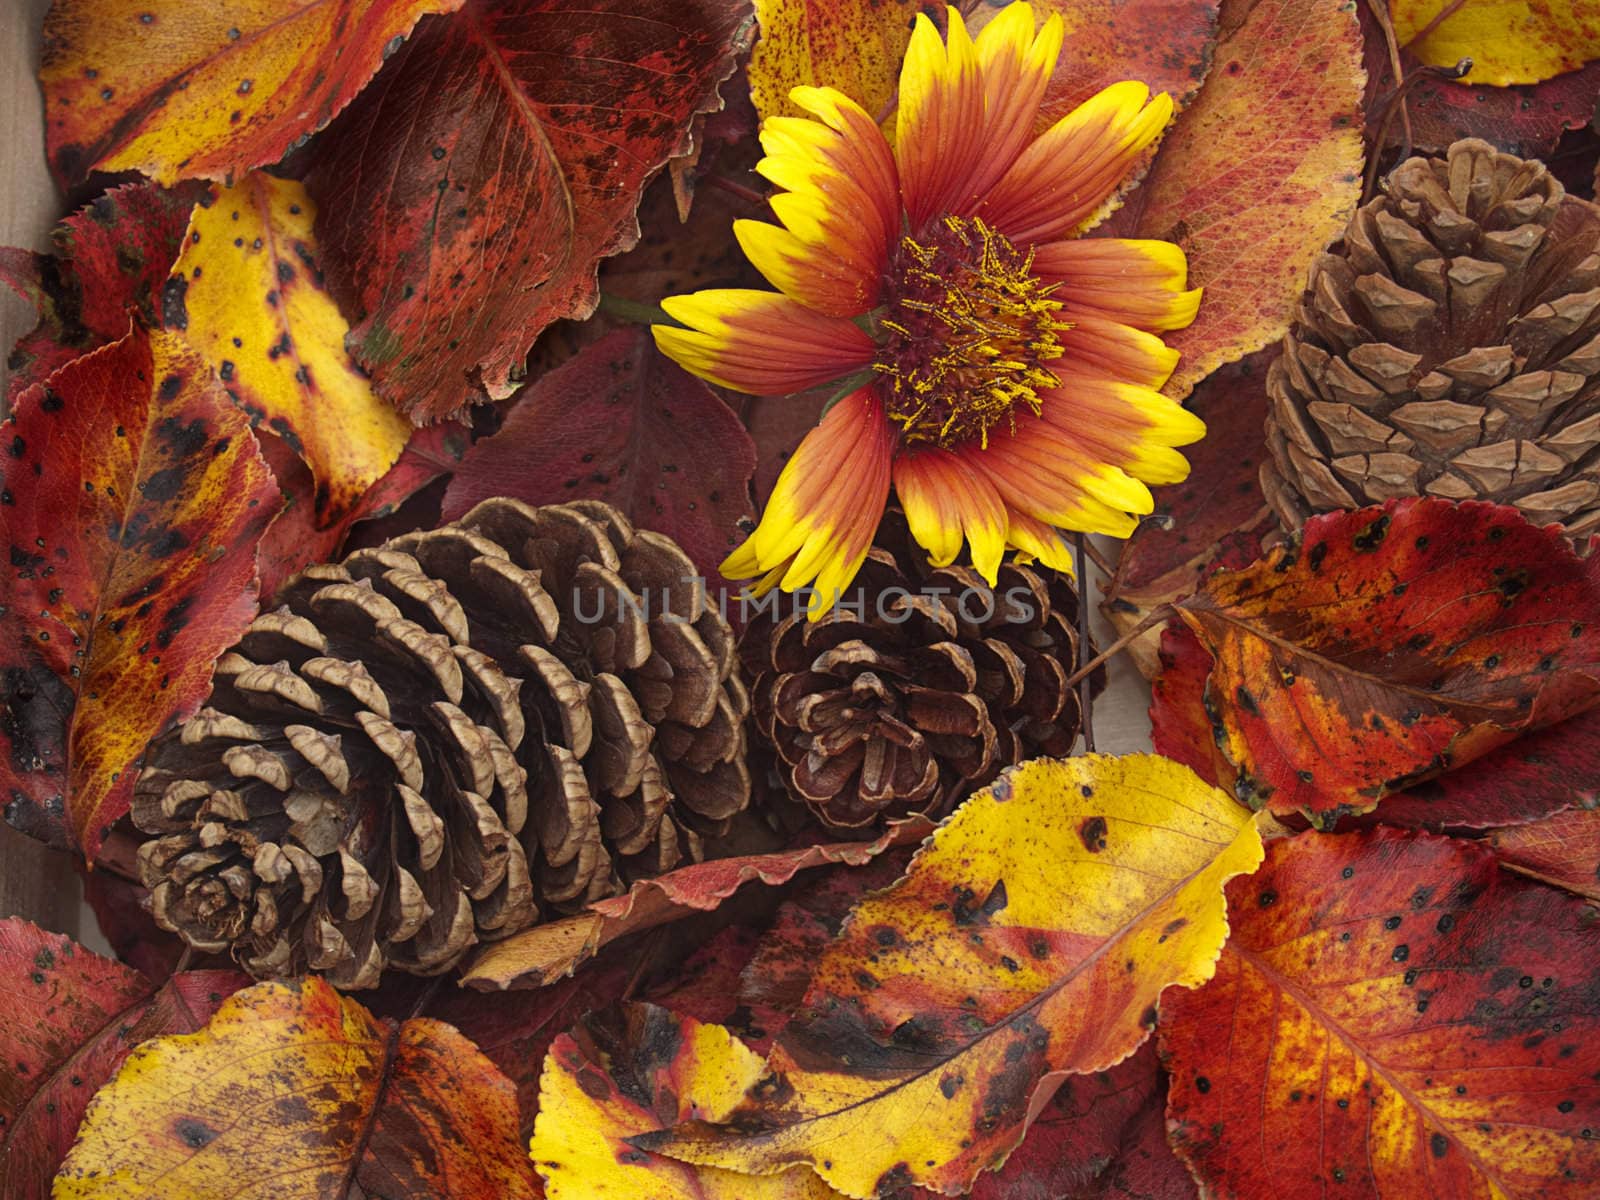 Pine cone in a pile of brilliant yellow and red Autumn leaves.